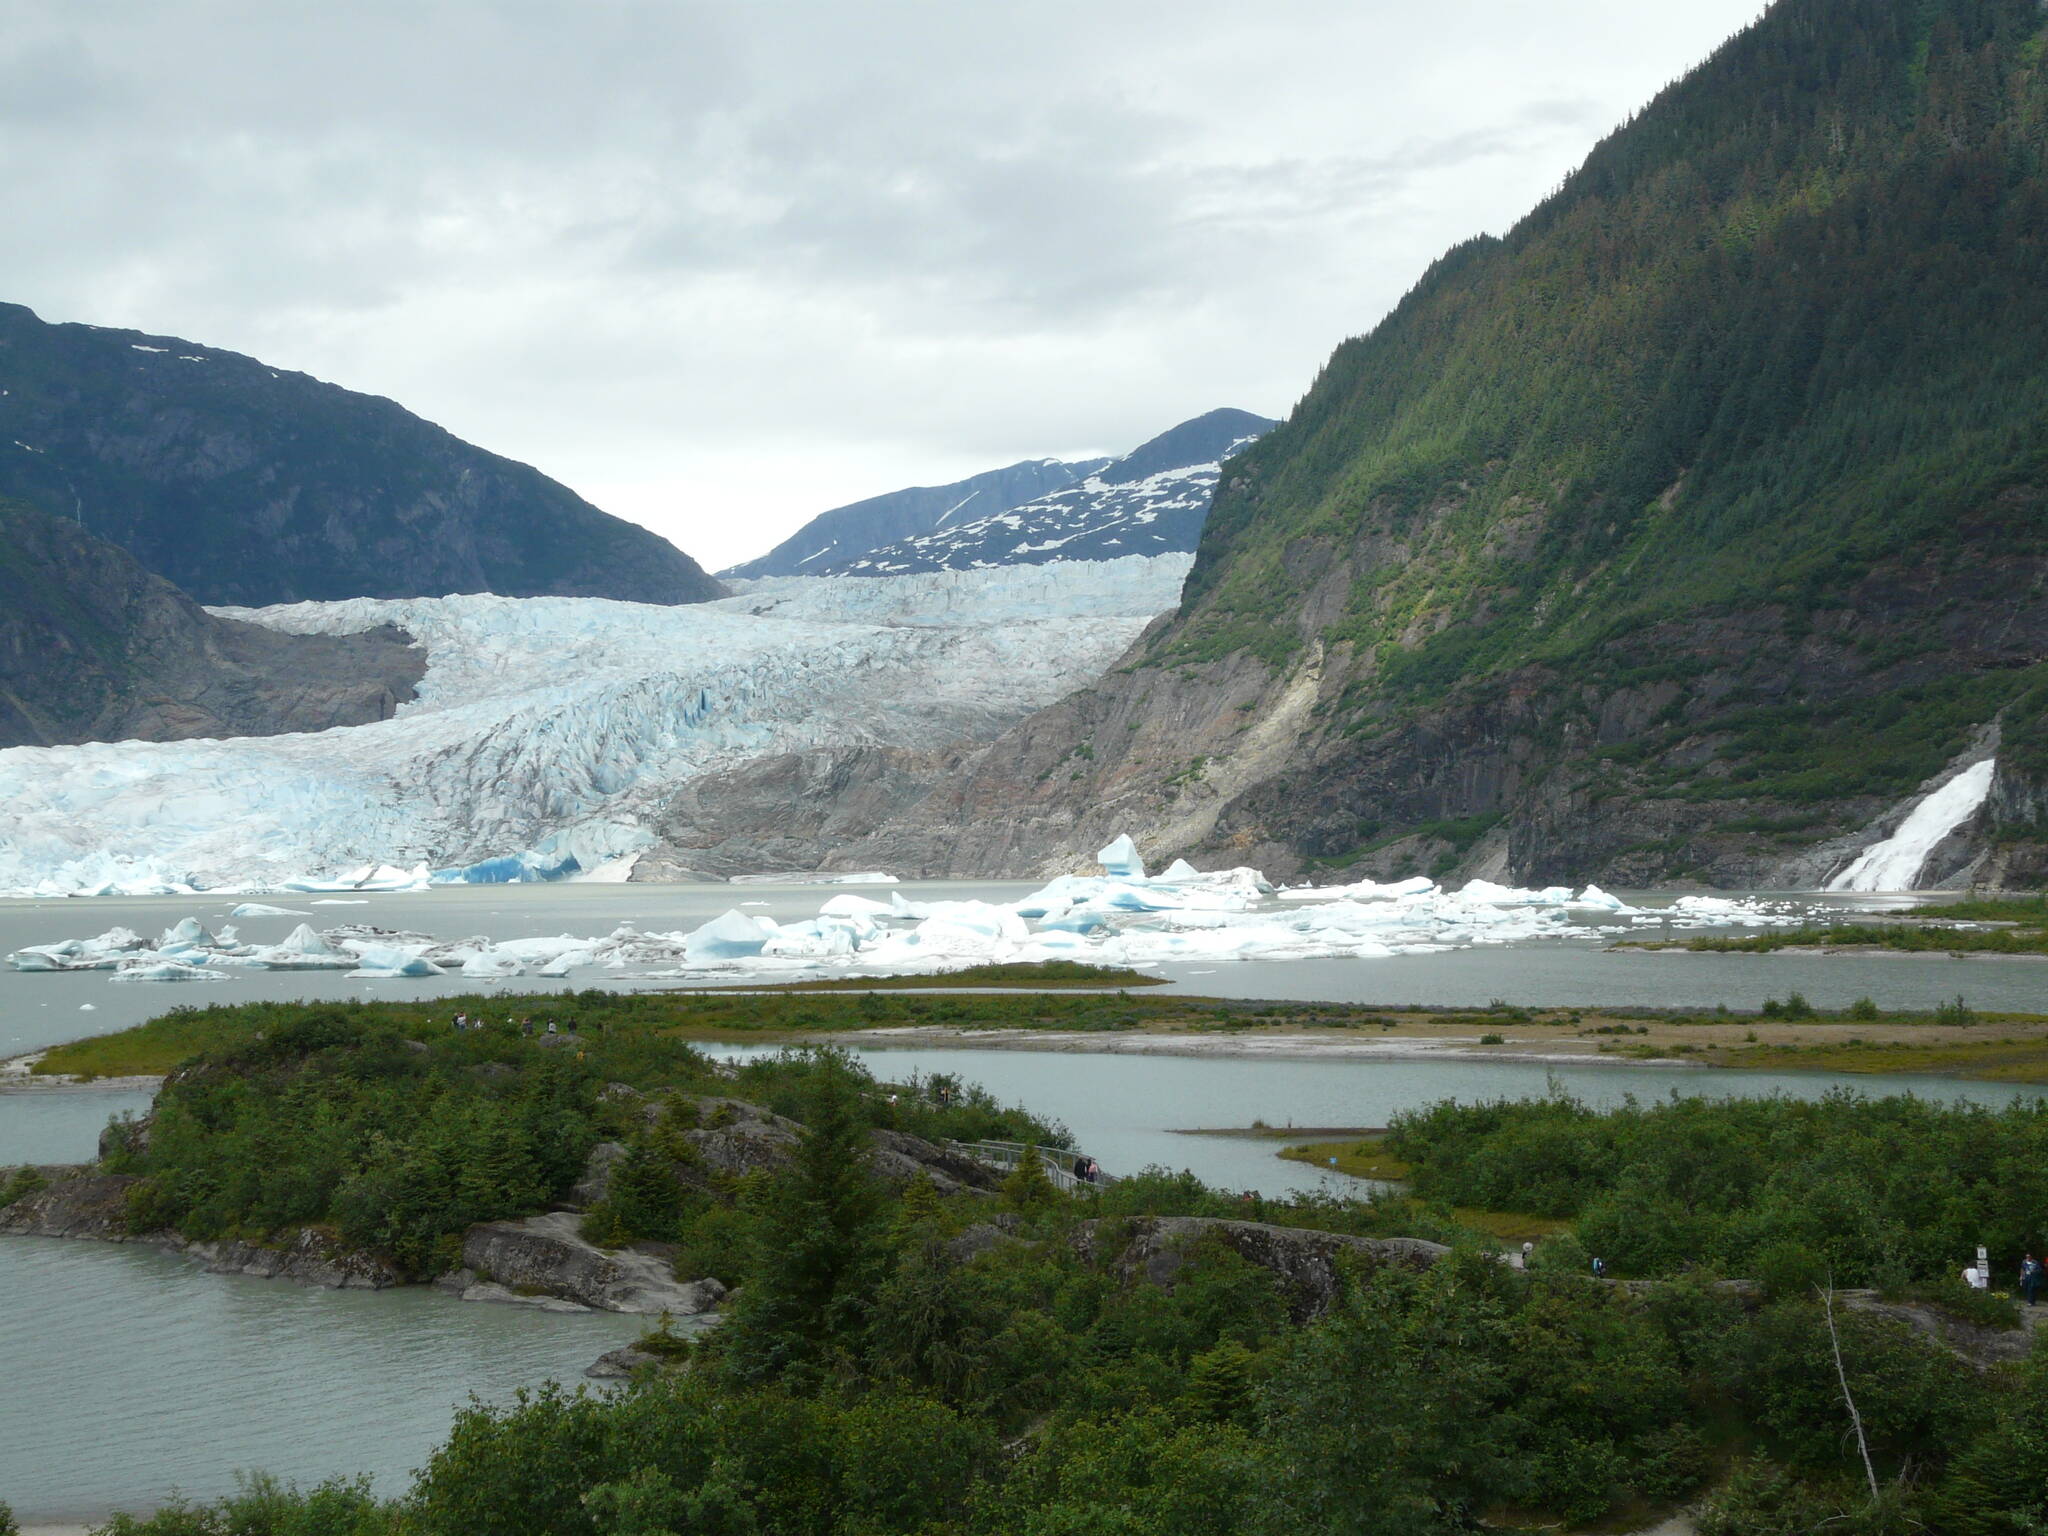 Mendenhall Lake is seen with many icebergs on July 17, 2011 prior to the first jökulhlaup. (Photo by Laurie Craig)